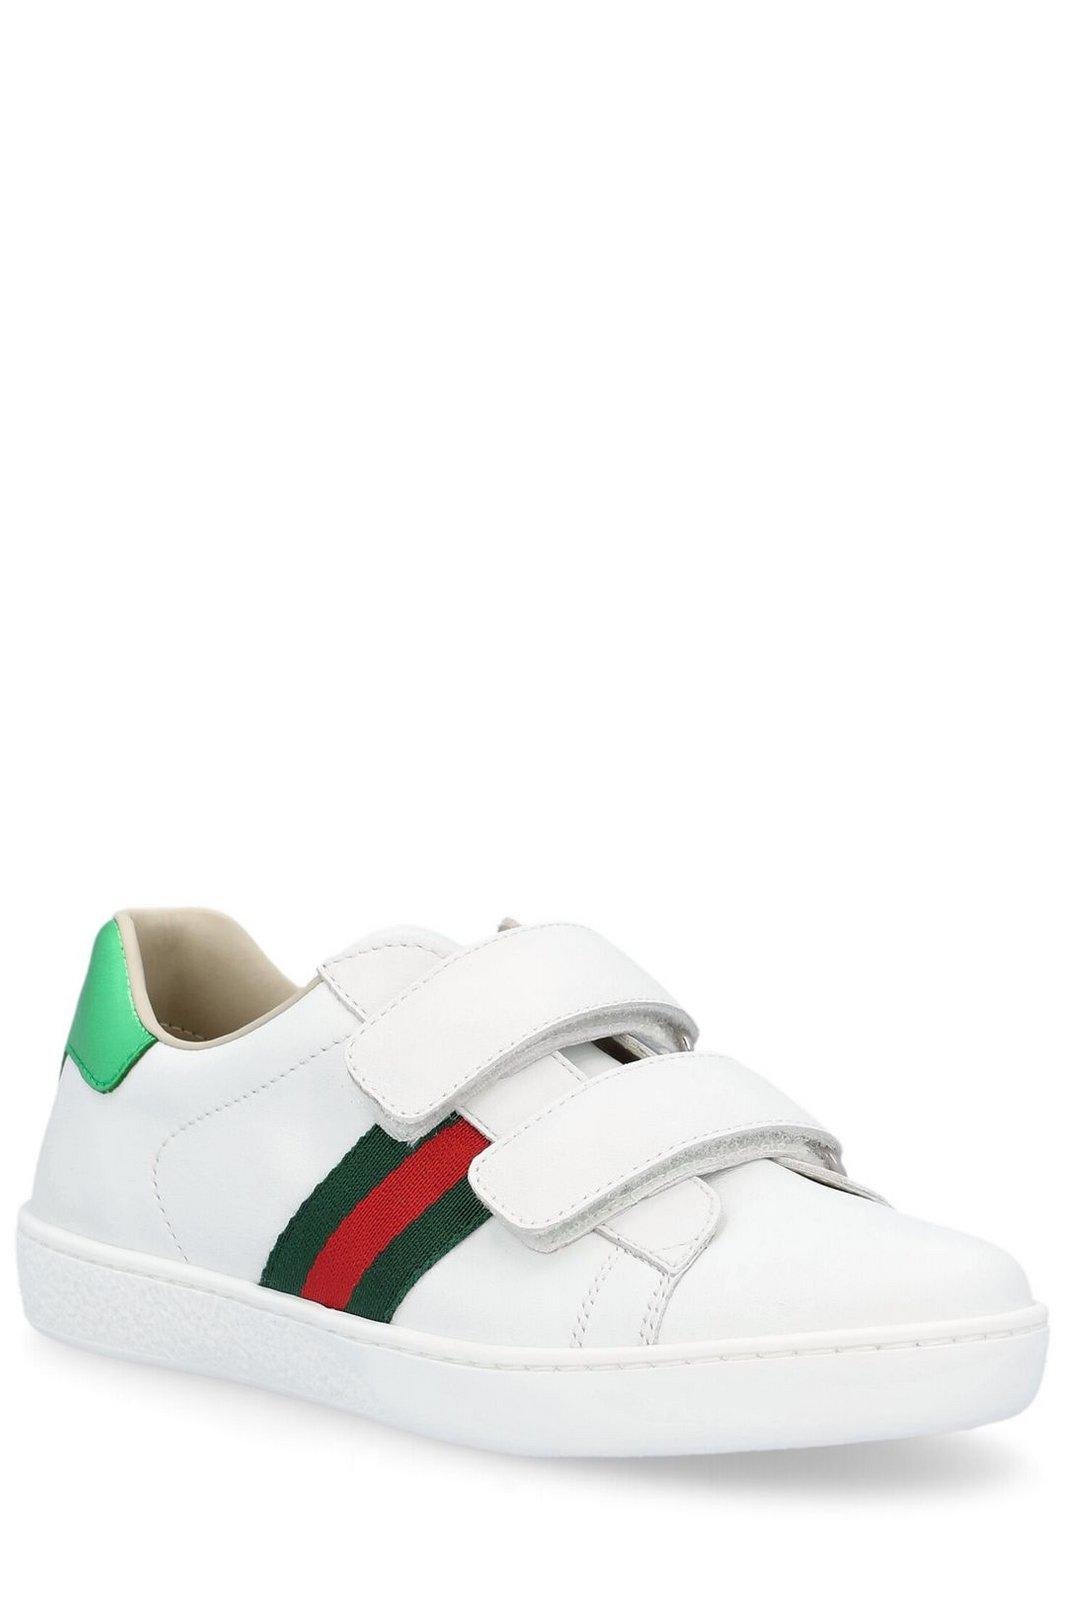 Shop Gucci Ace Round Toe Sneakers